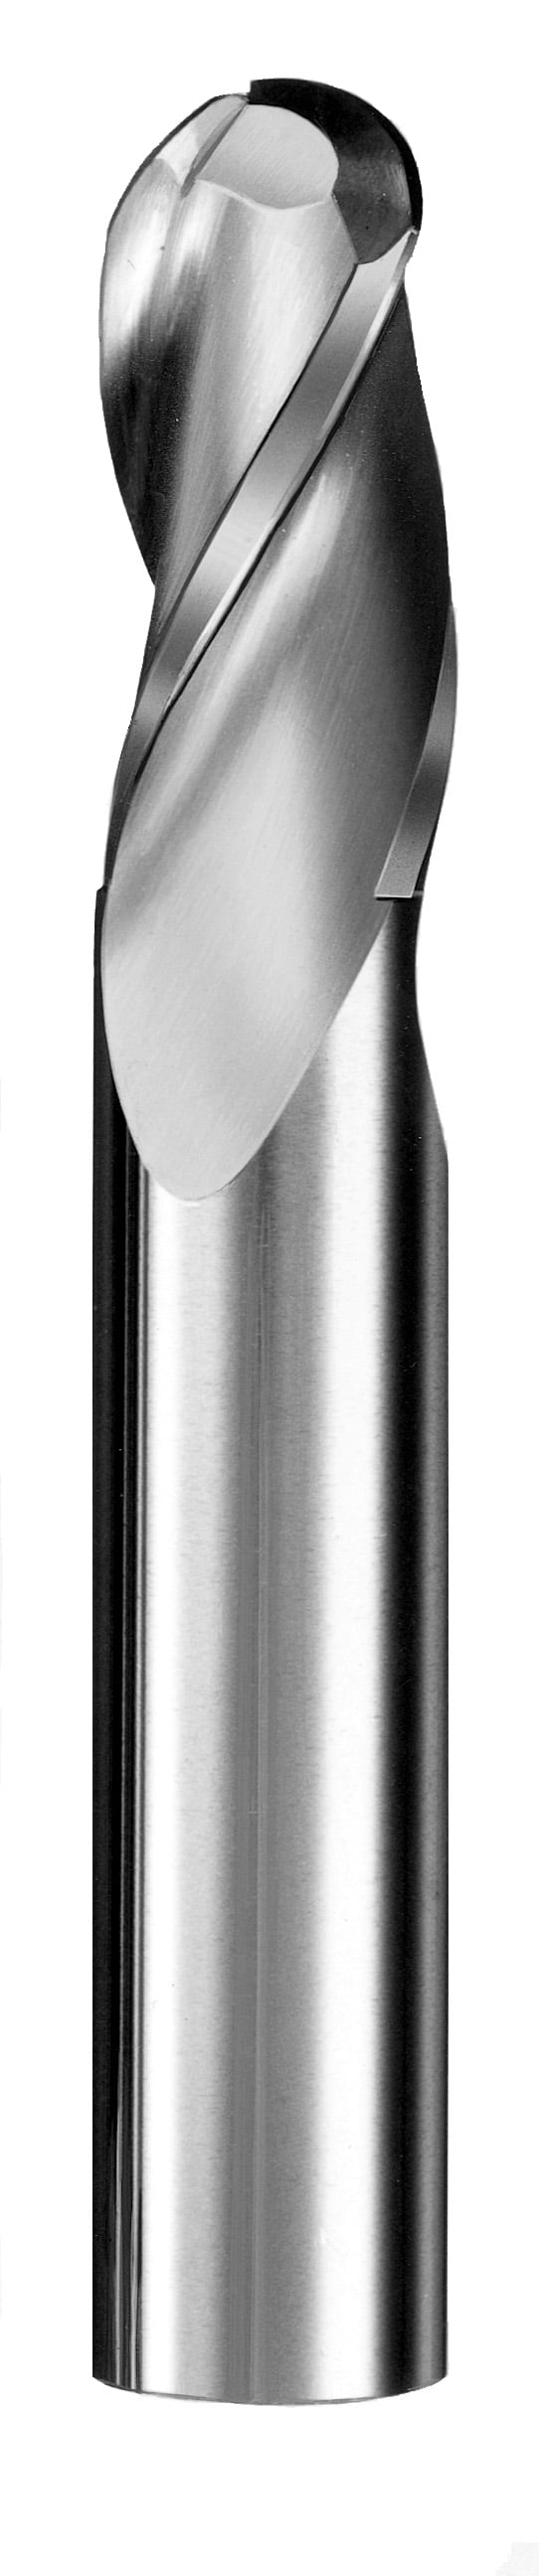 1/16" Dia, 3 Flute, Ball Nose End Mill - 30508